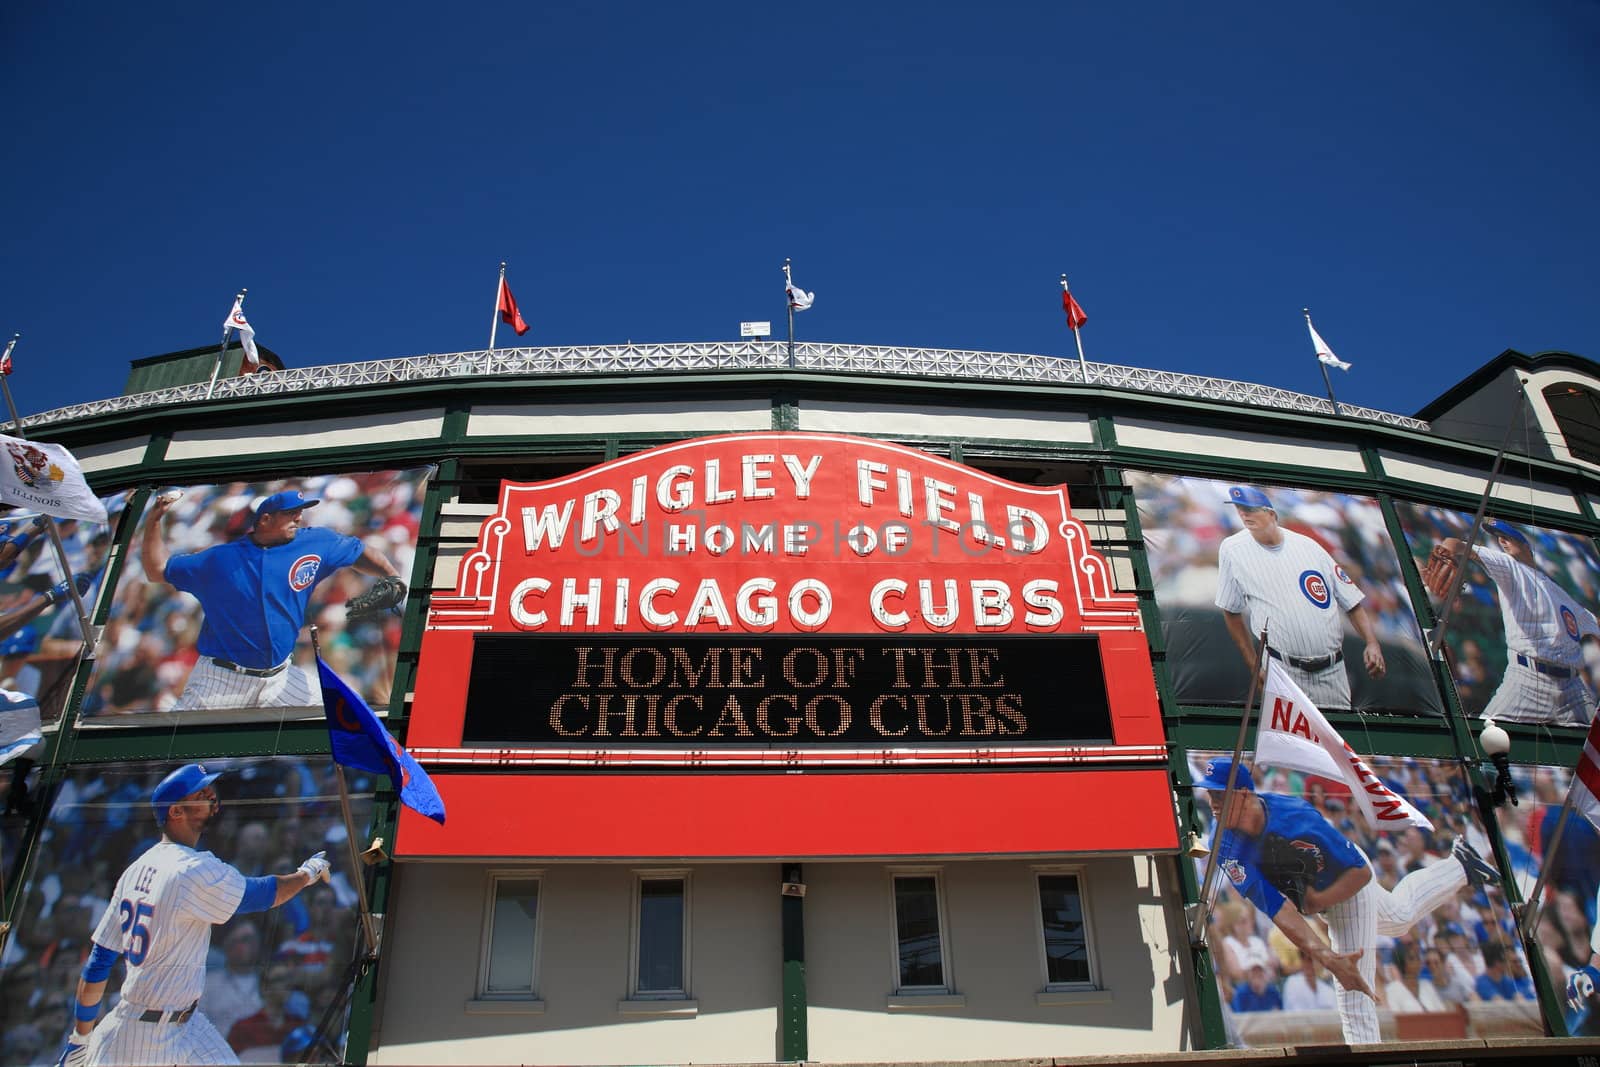 Historic ballpark and famous welcome sign of the Chicago Cubs